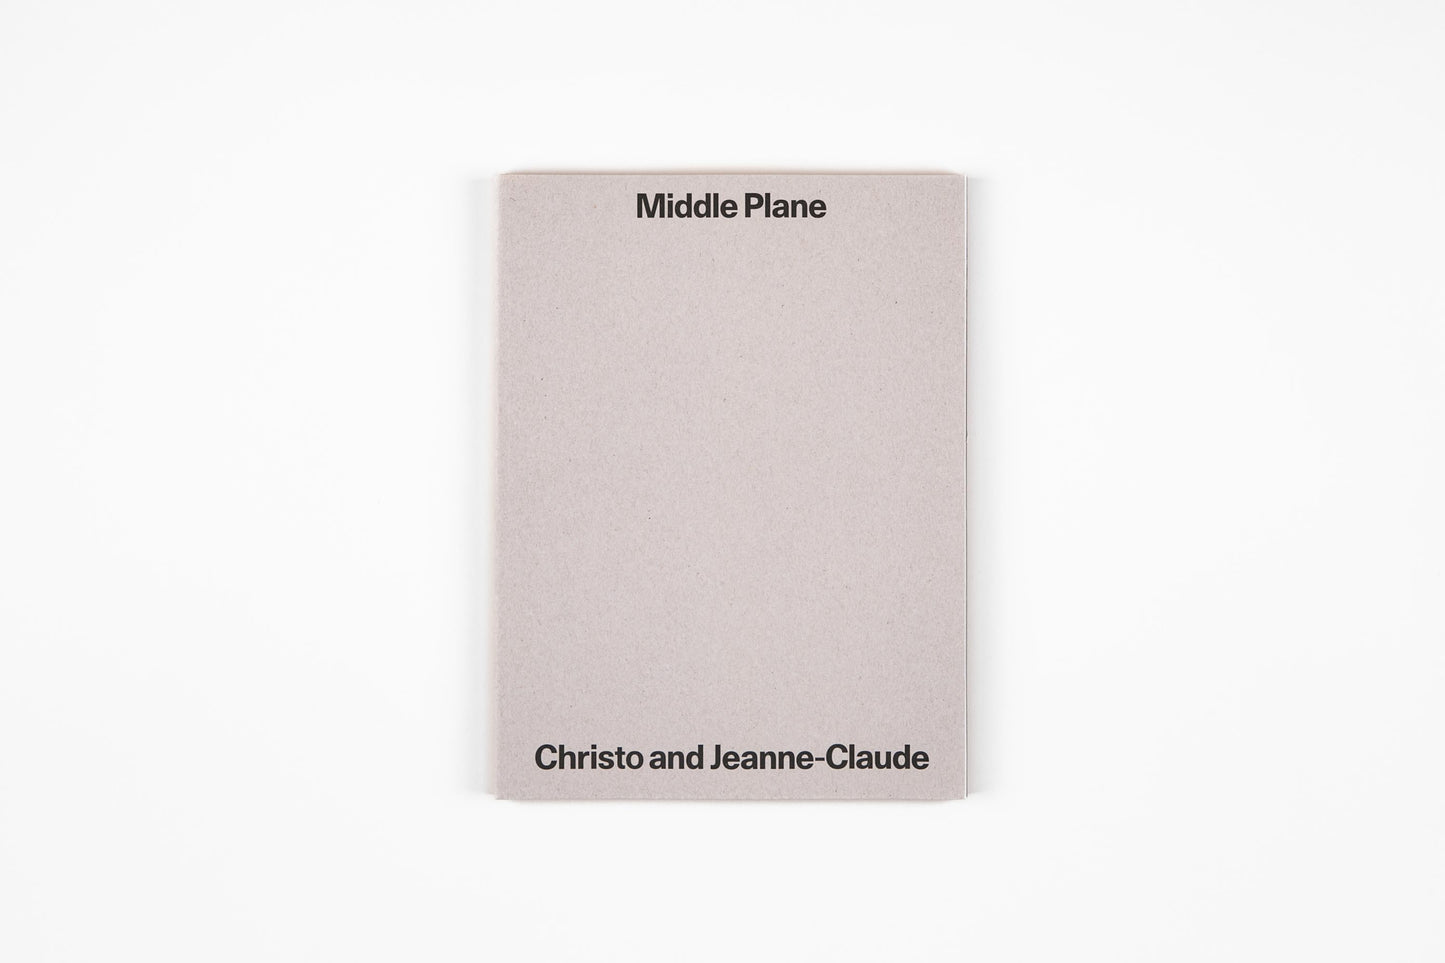 Middle Plane Issue 4 on Christo and Jeanne-Claude